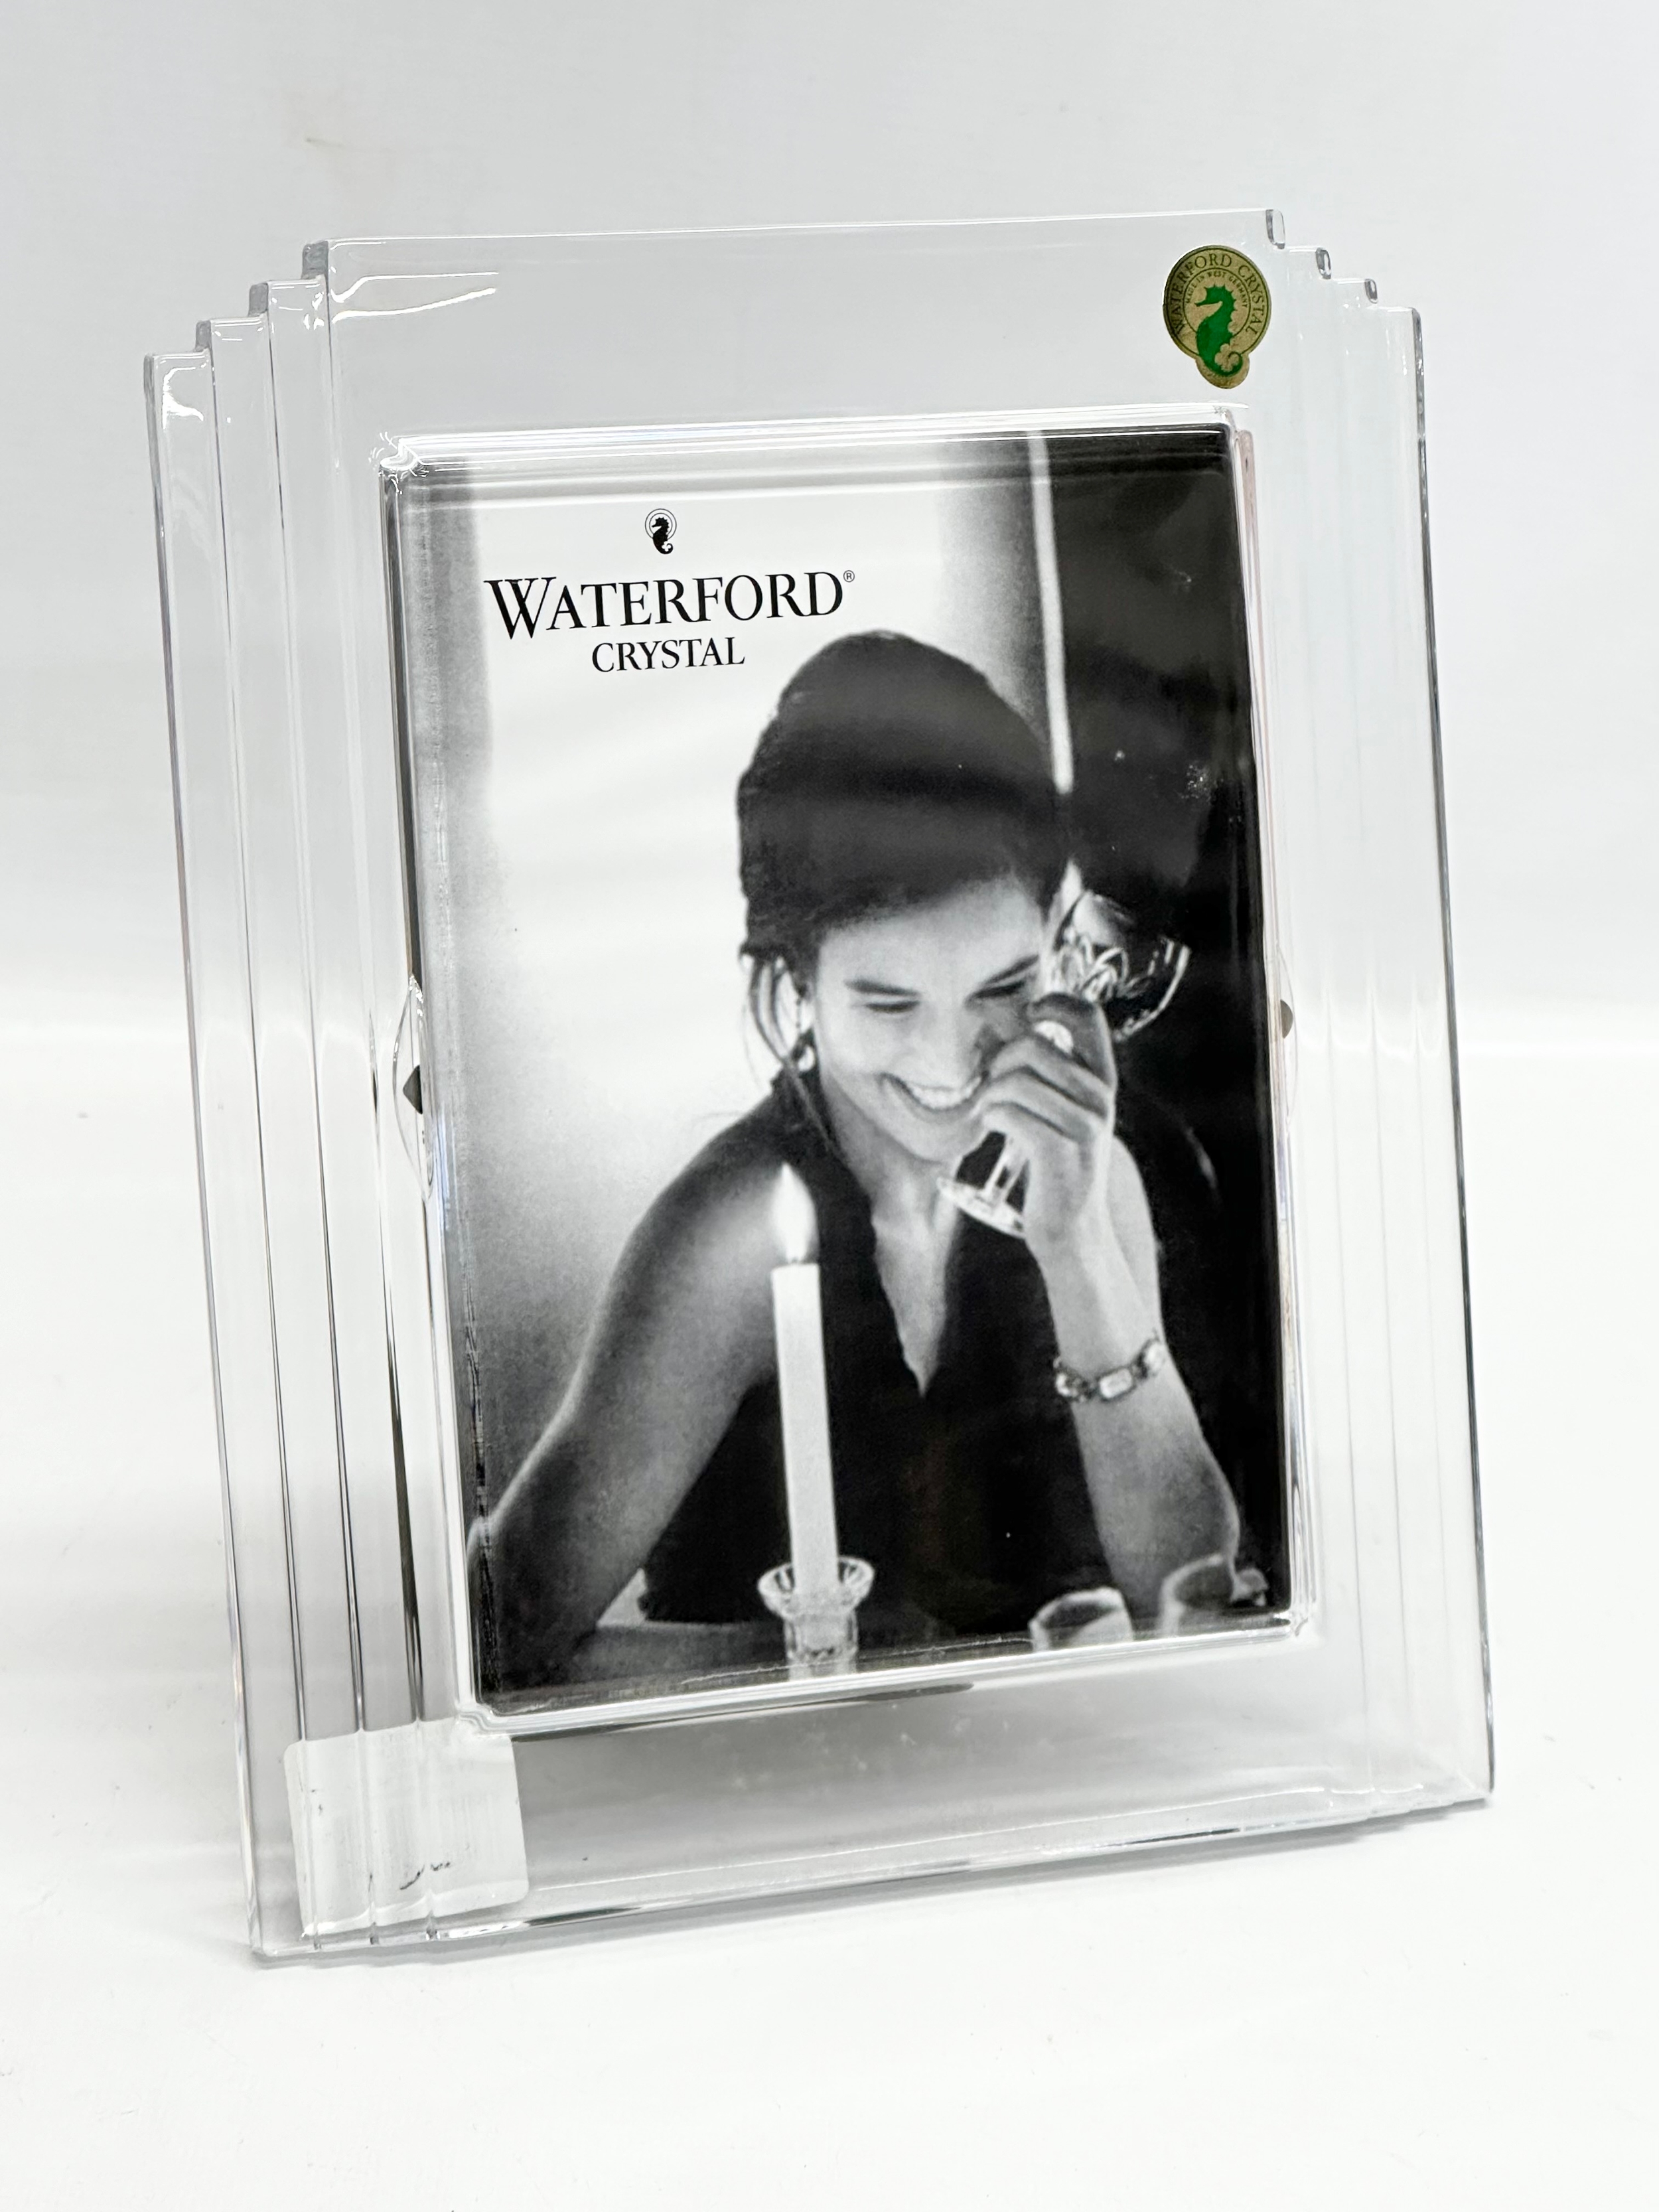 Waterford Crystal photo frames. Waterford Portraits. 19.5x24.5cm - Image 3 of 5